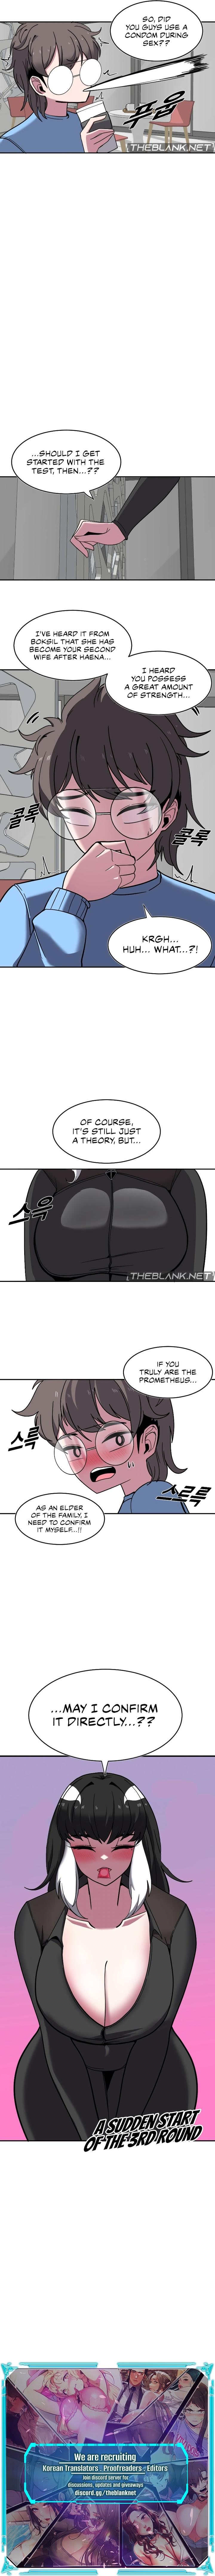 Double Life of Gukbap - Chapter 10 Page 7